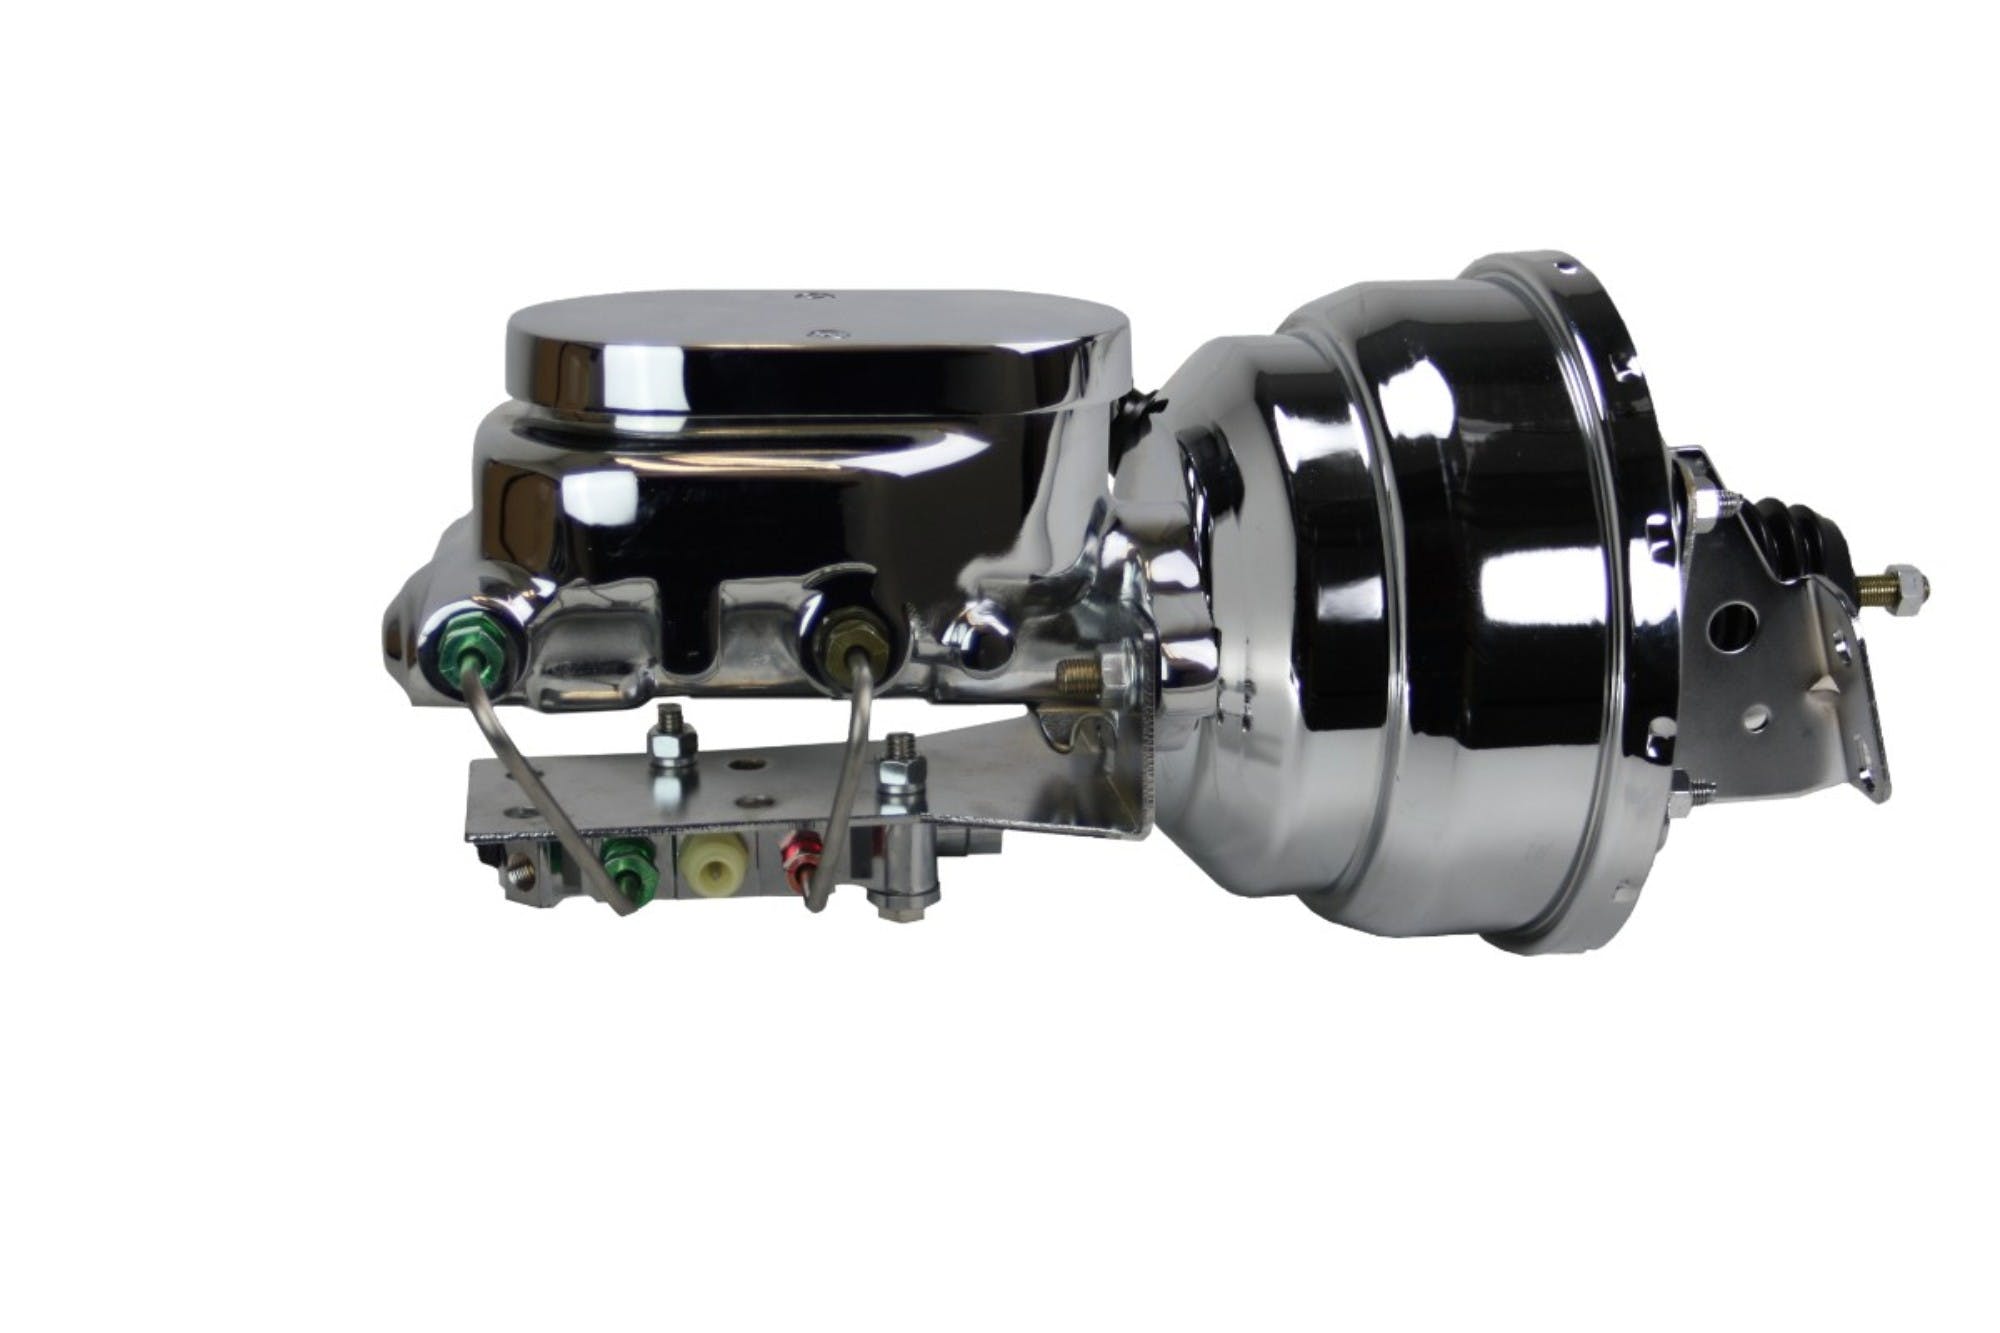 LEED Brakes PBKT1060 8 inch Dual Chrome Booster